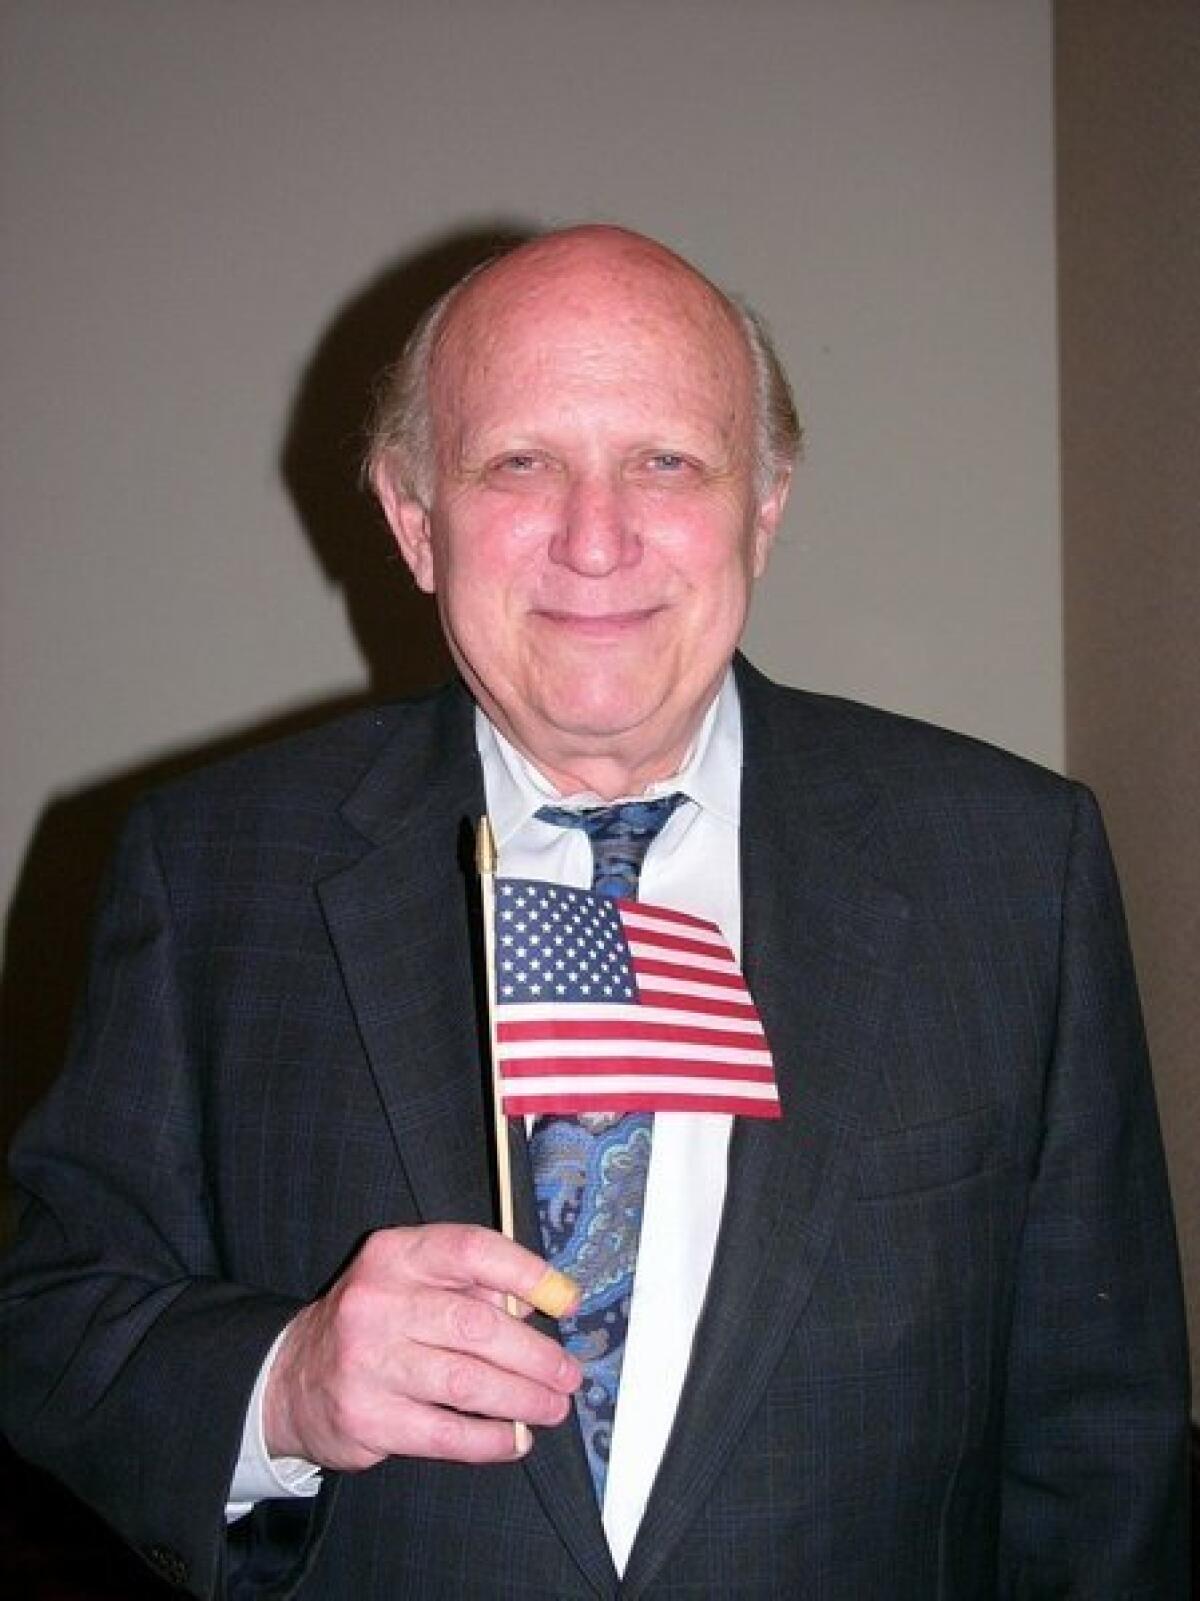 Renowned First Amendment attorney Floyd Abrams shows the flag at a Jewish Museum dinner in New York